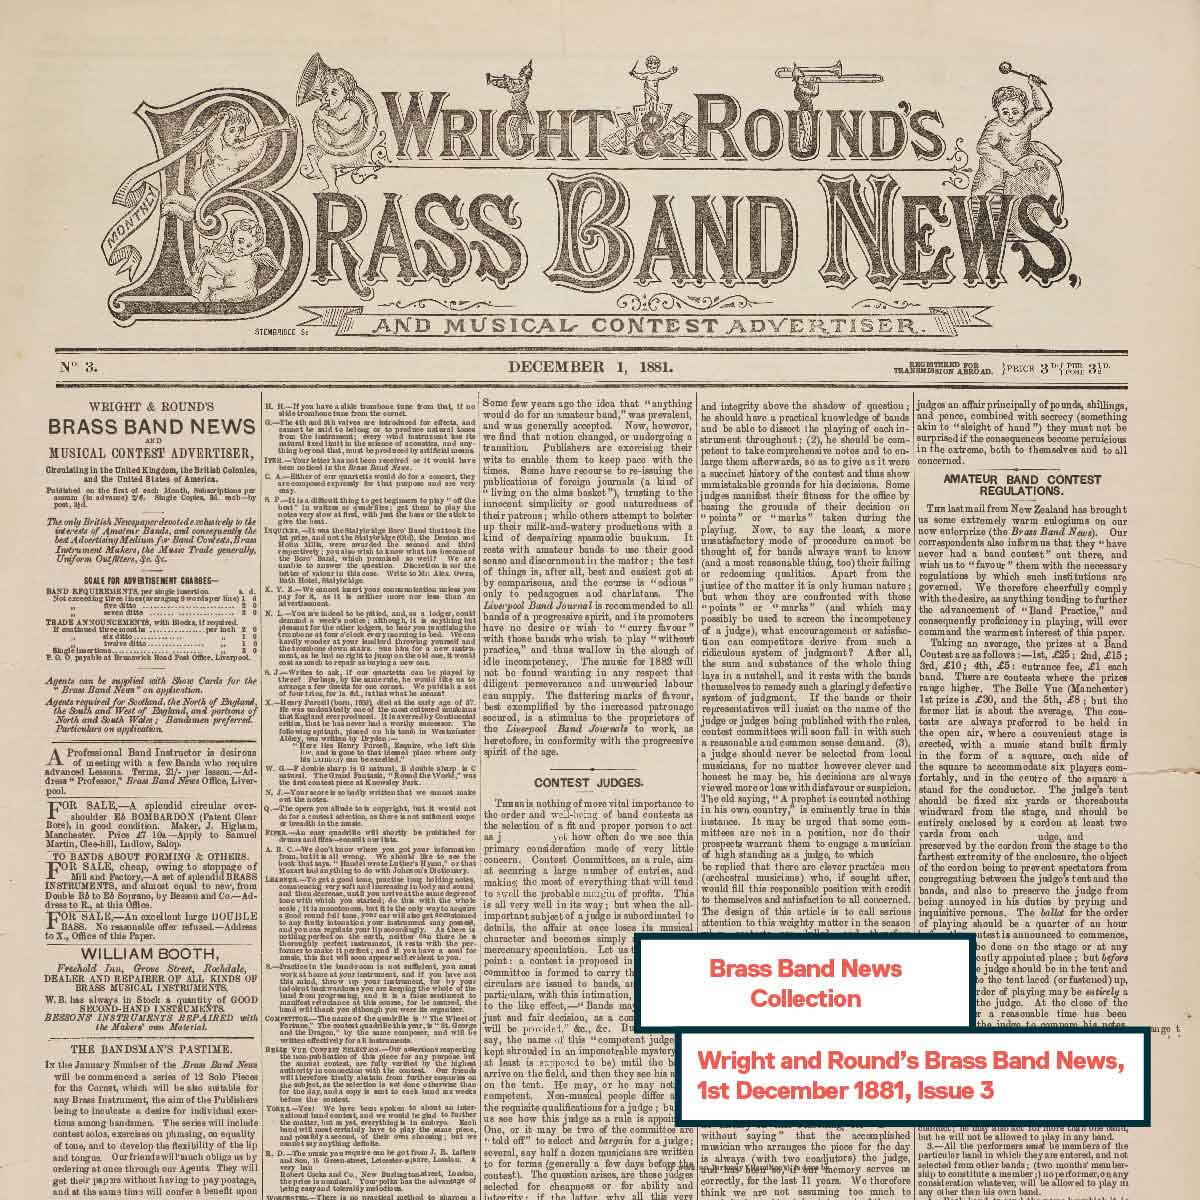 A cover of Brass Band News